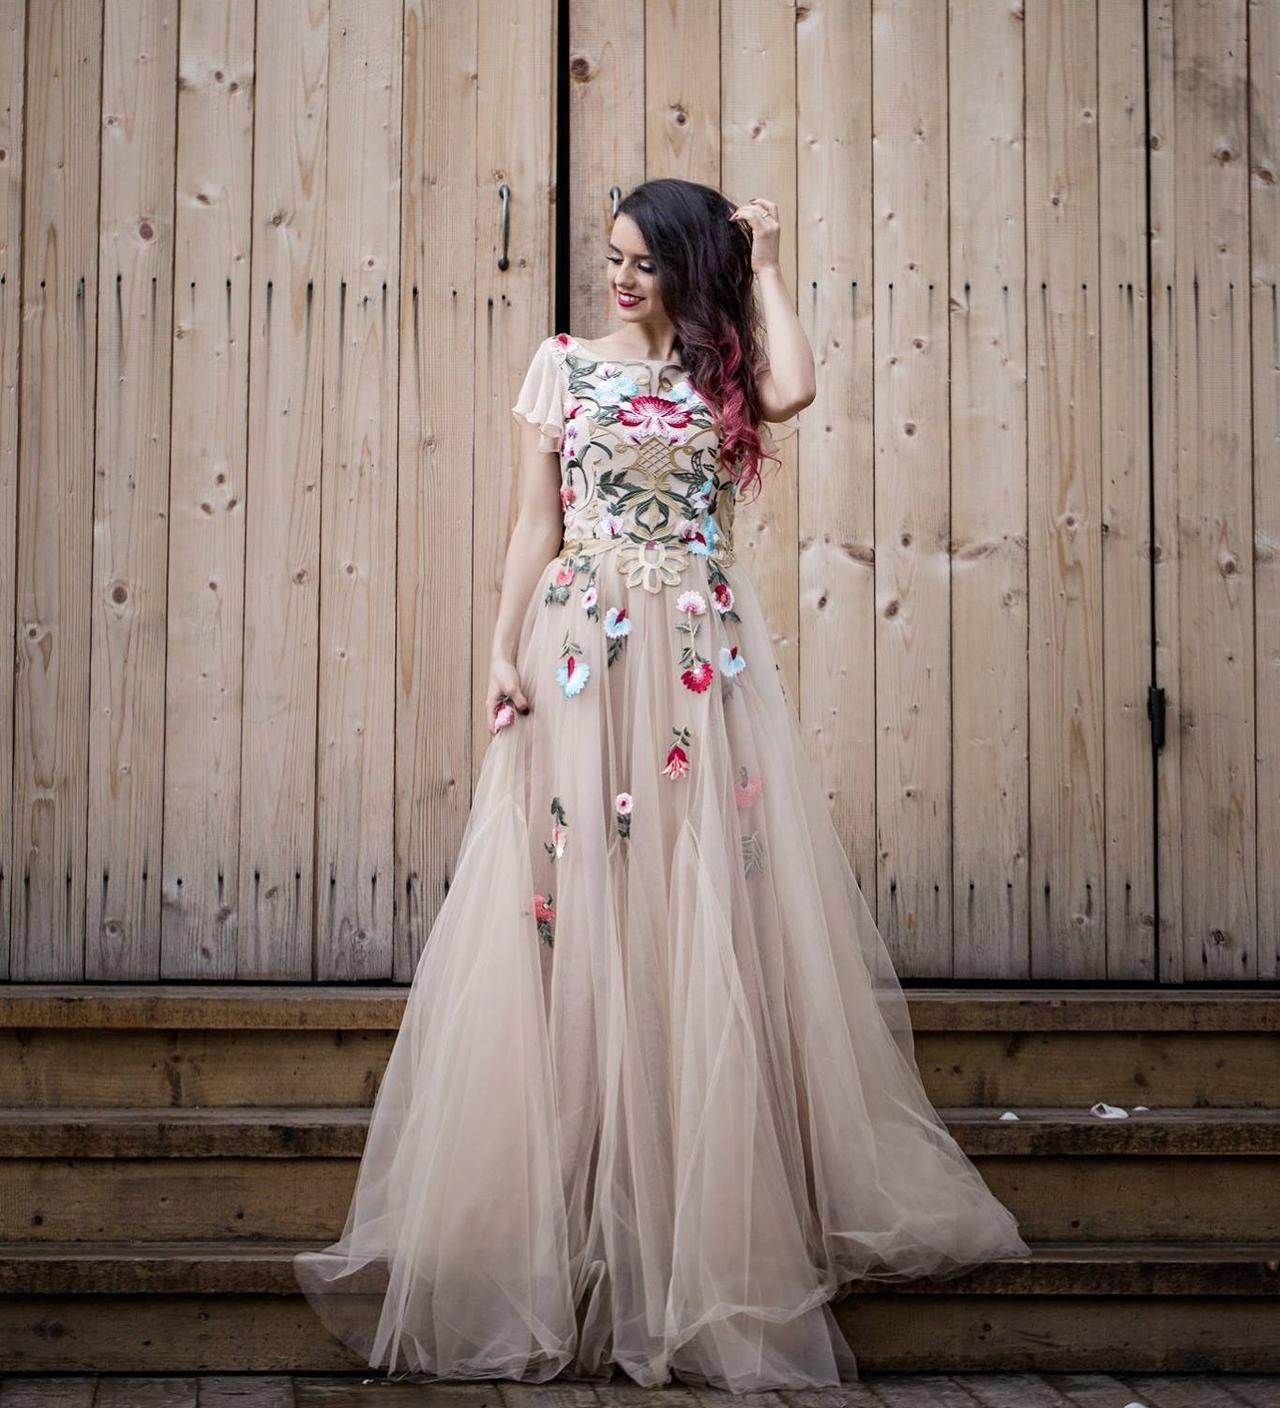 Boldly Boho: Embroidered Wedding dresses with Colourful Florals